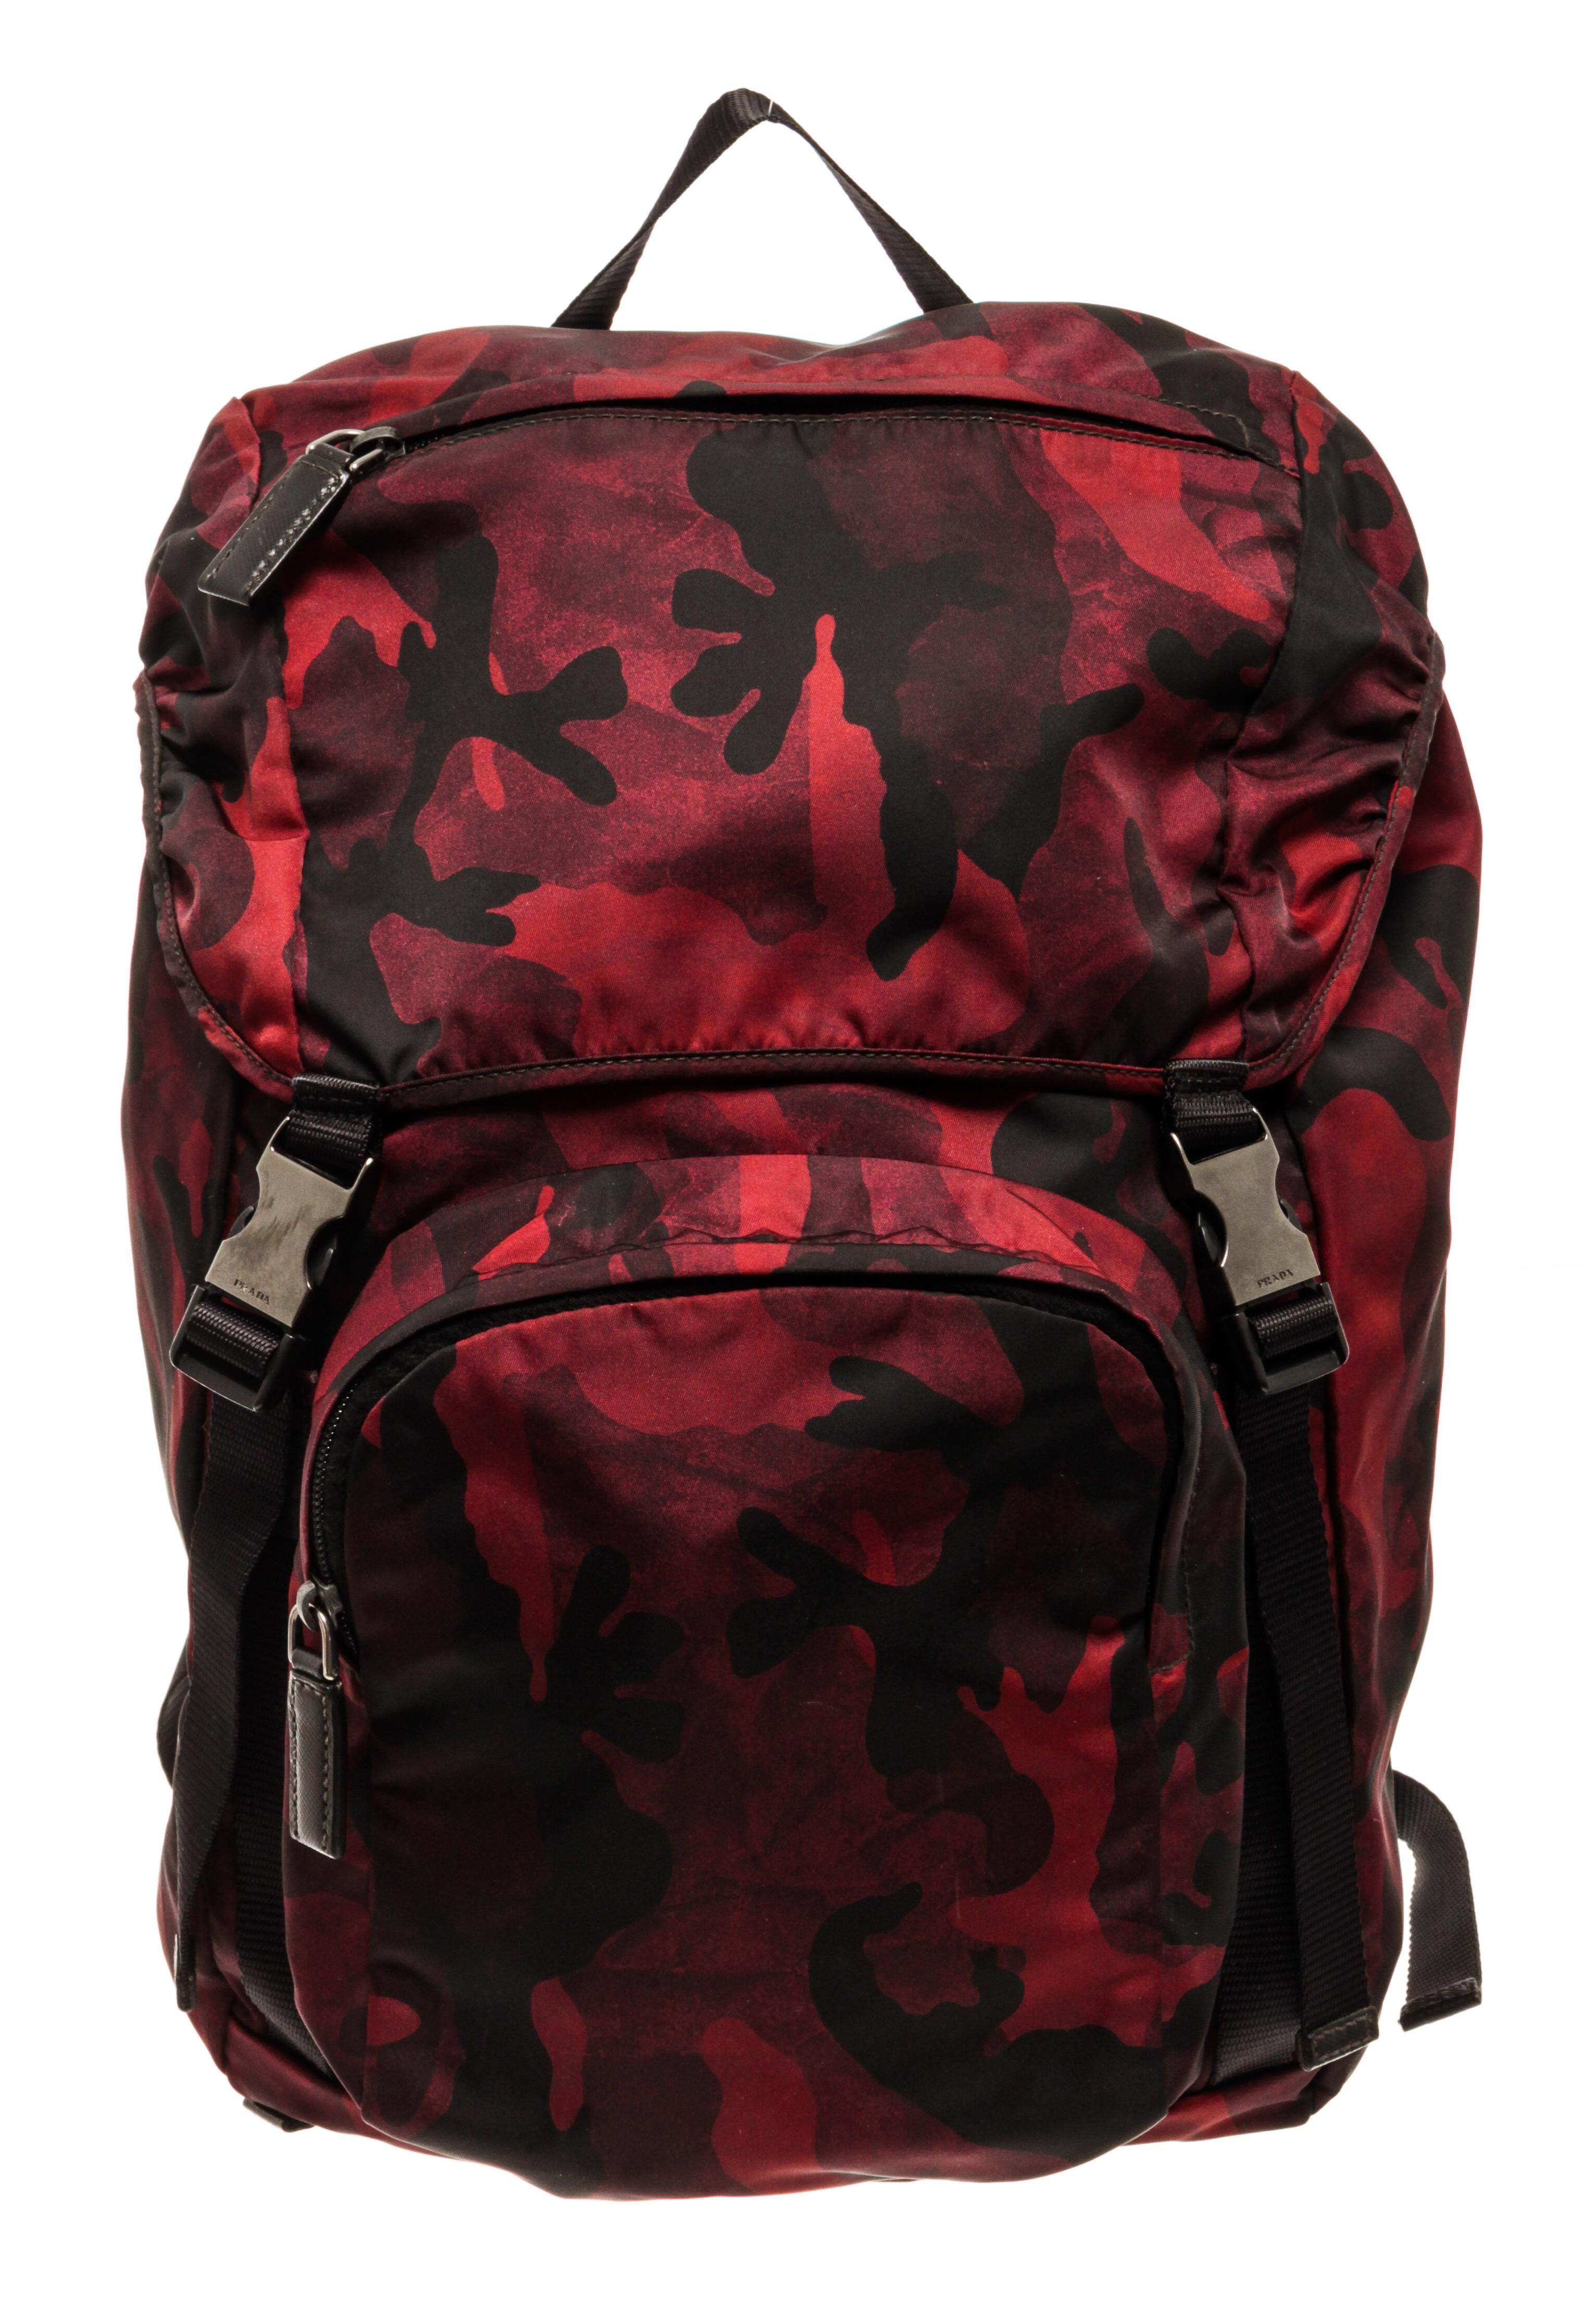 Prada red camouflage tessuto backpack with adjustable straps, one exterior zipper pocket on the top flap, one exterior zipper pocket on the front, double buckle, and drawstring and flap closure.

83192MSC